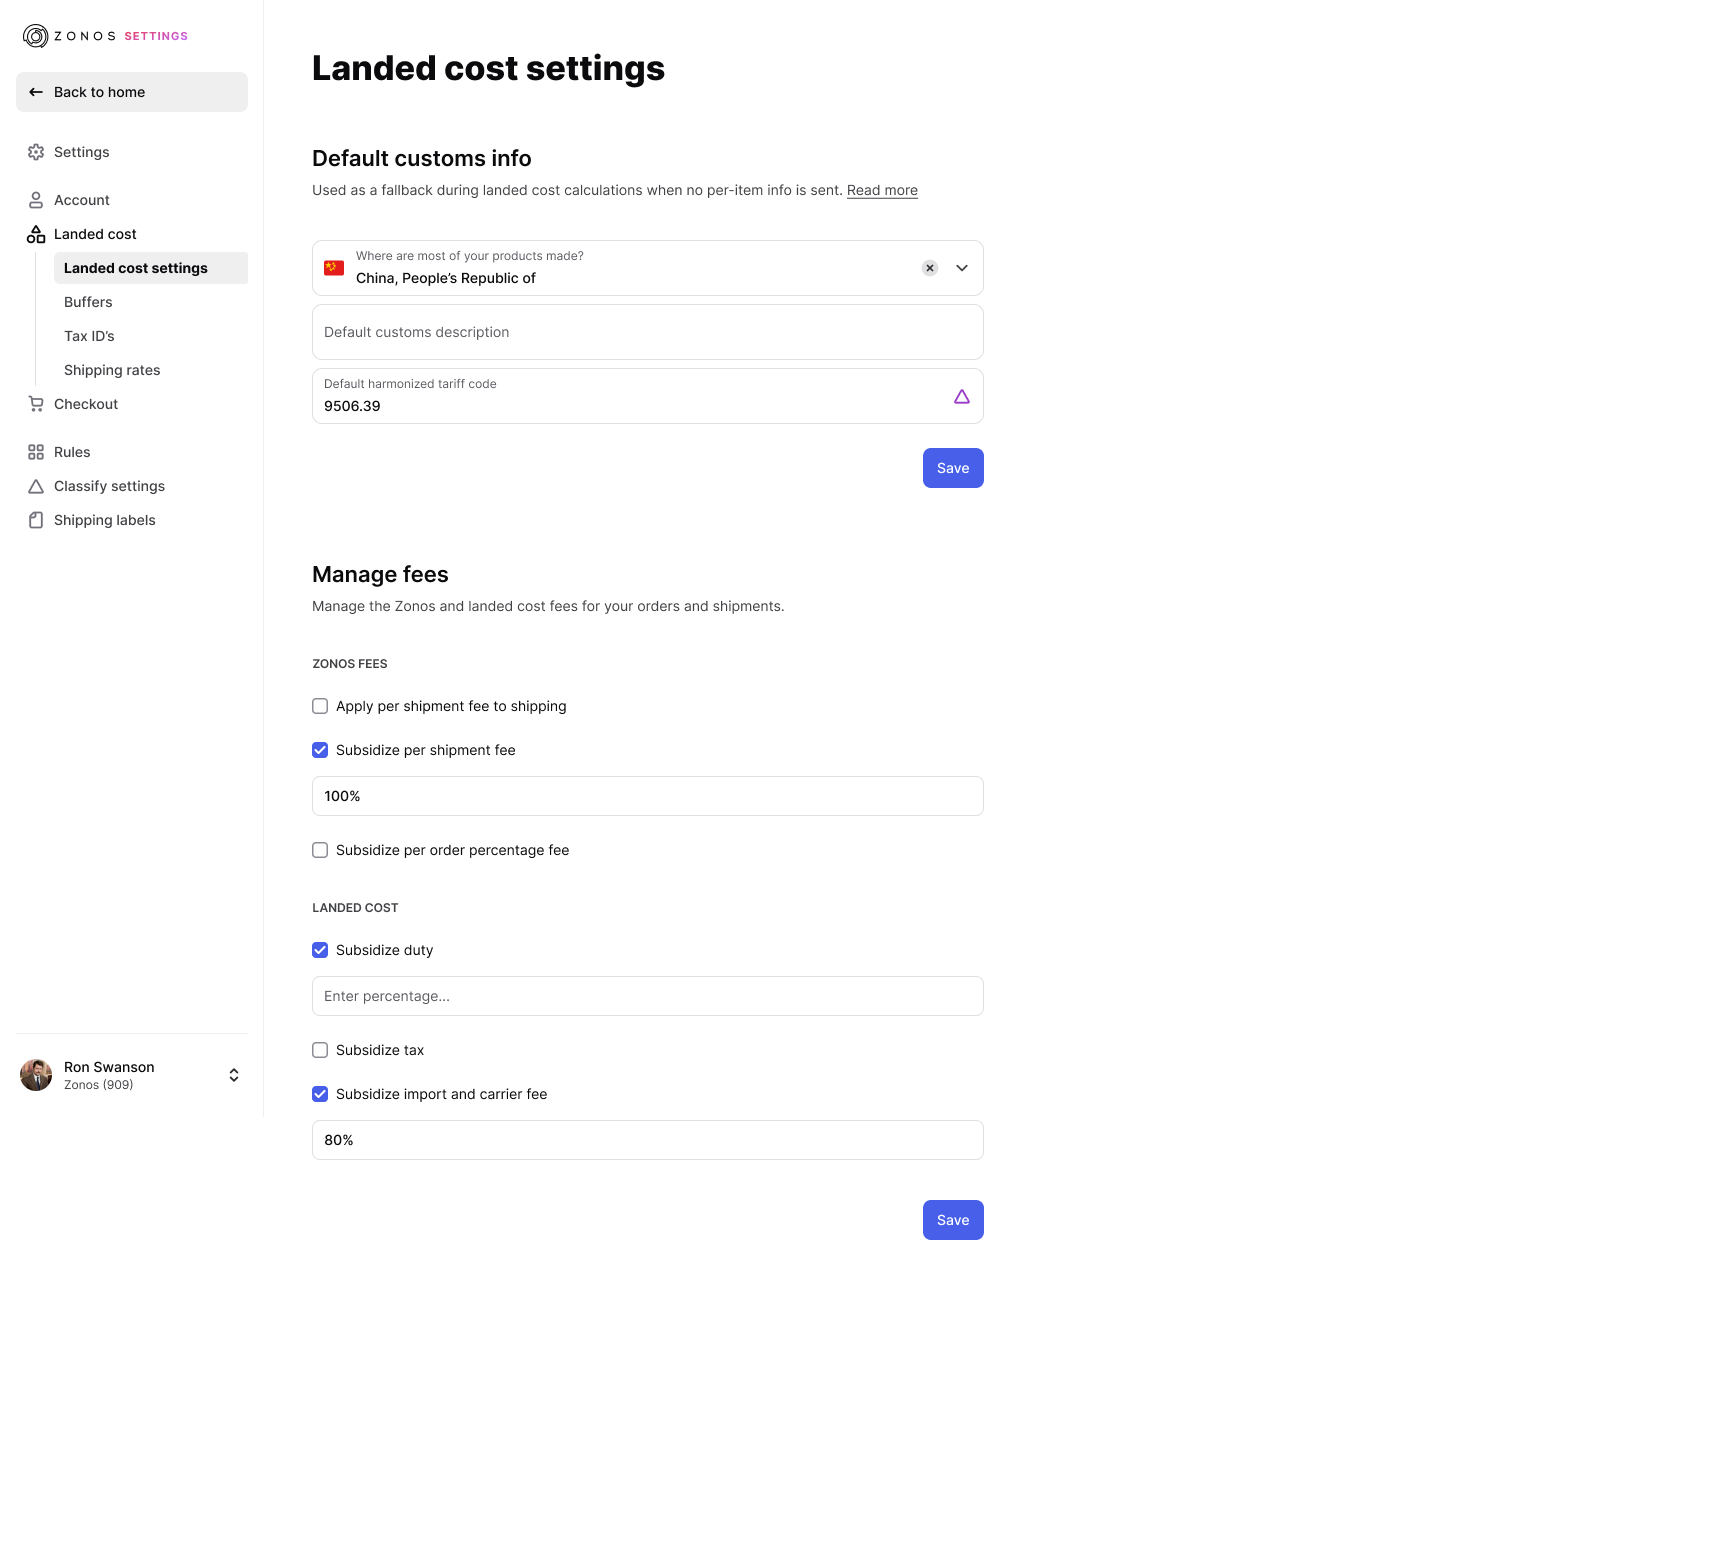 Manage duties, taxes, and fees in Dashboard